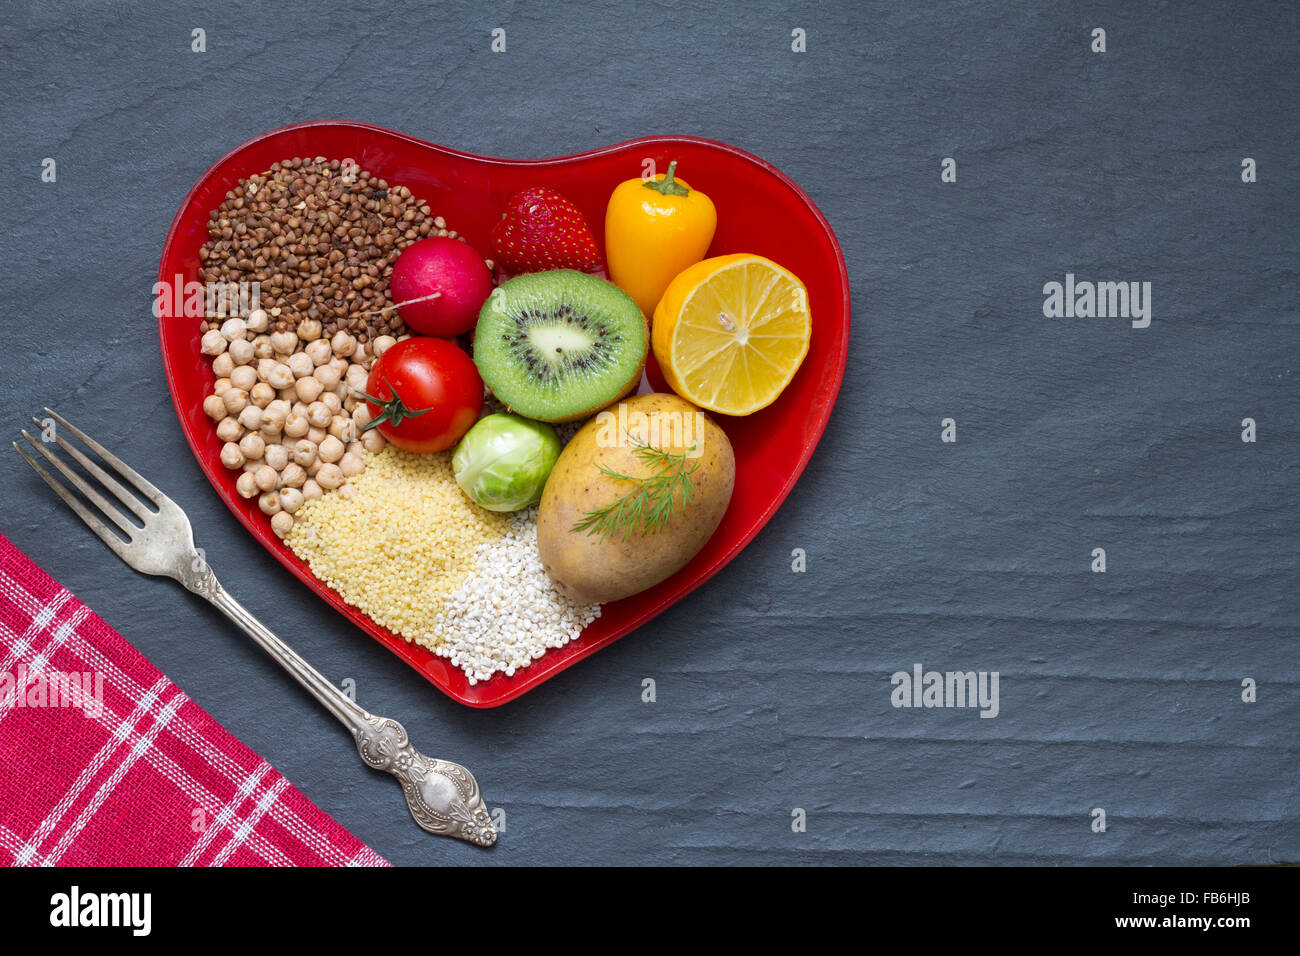 Health food on a red heart plate diets abstract still life concept Stock Photo